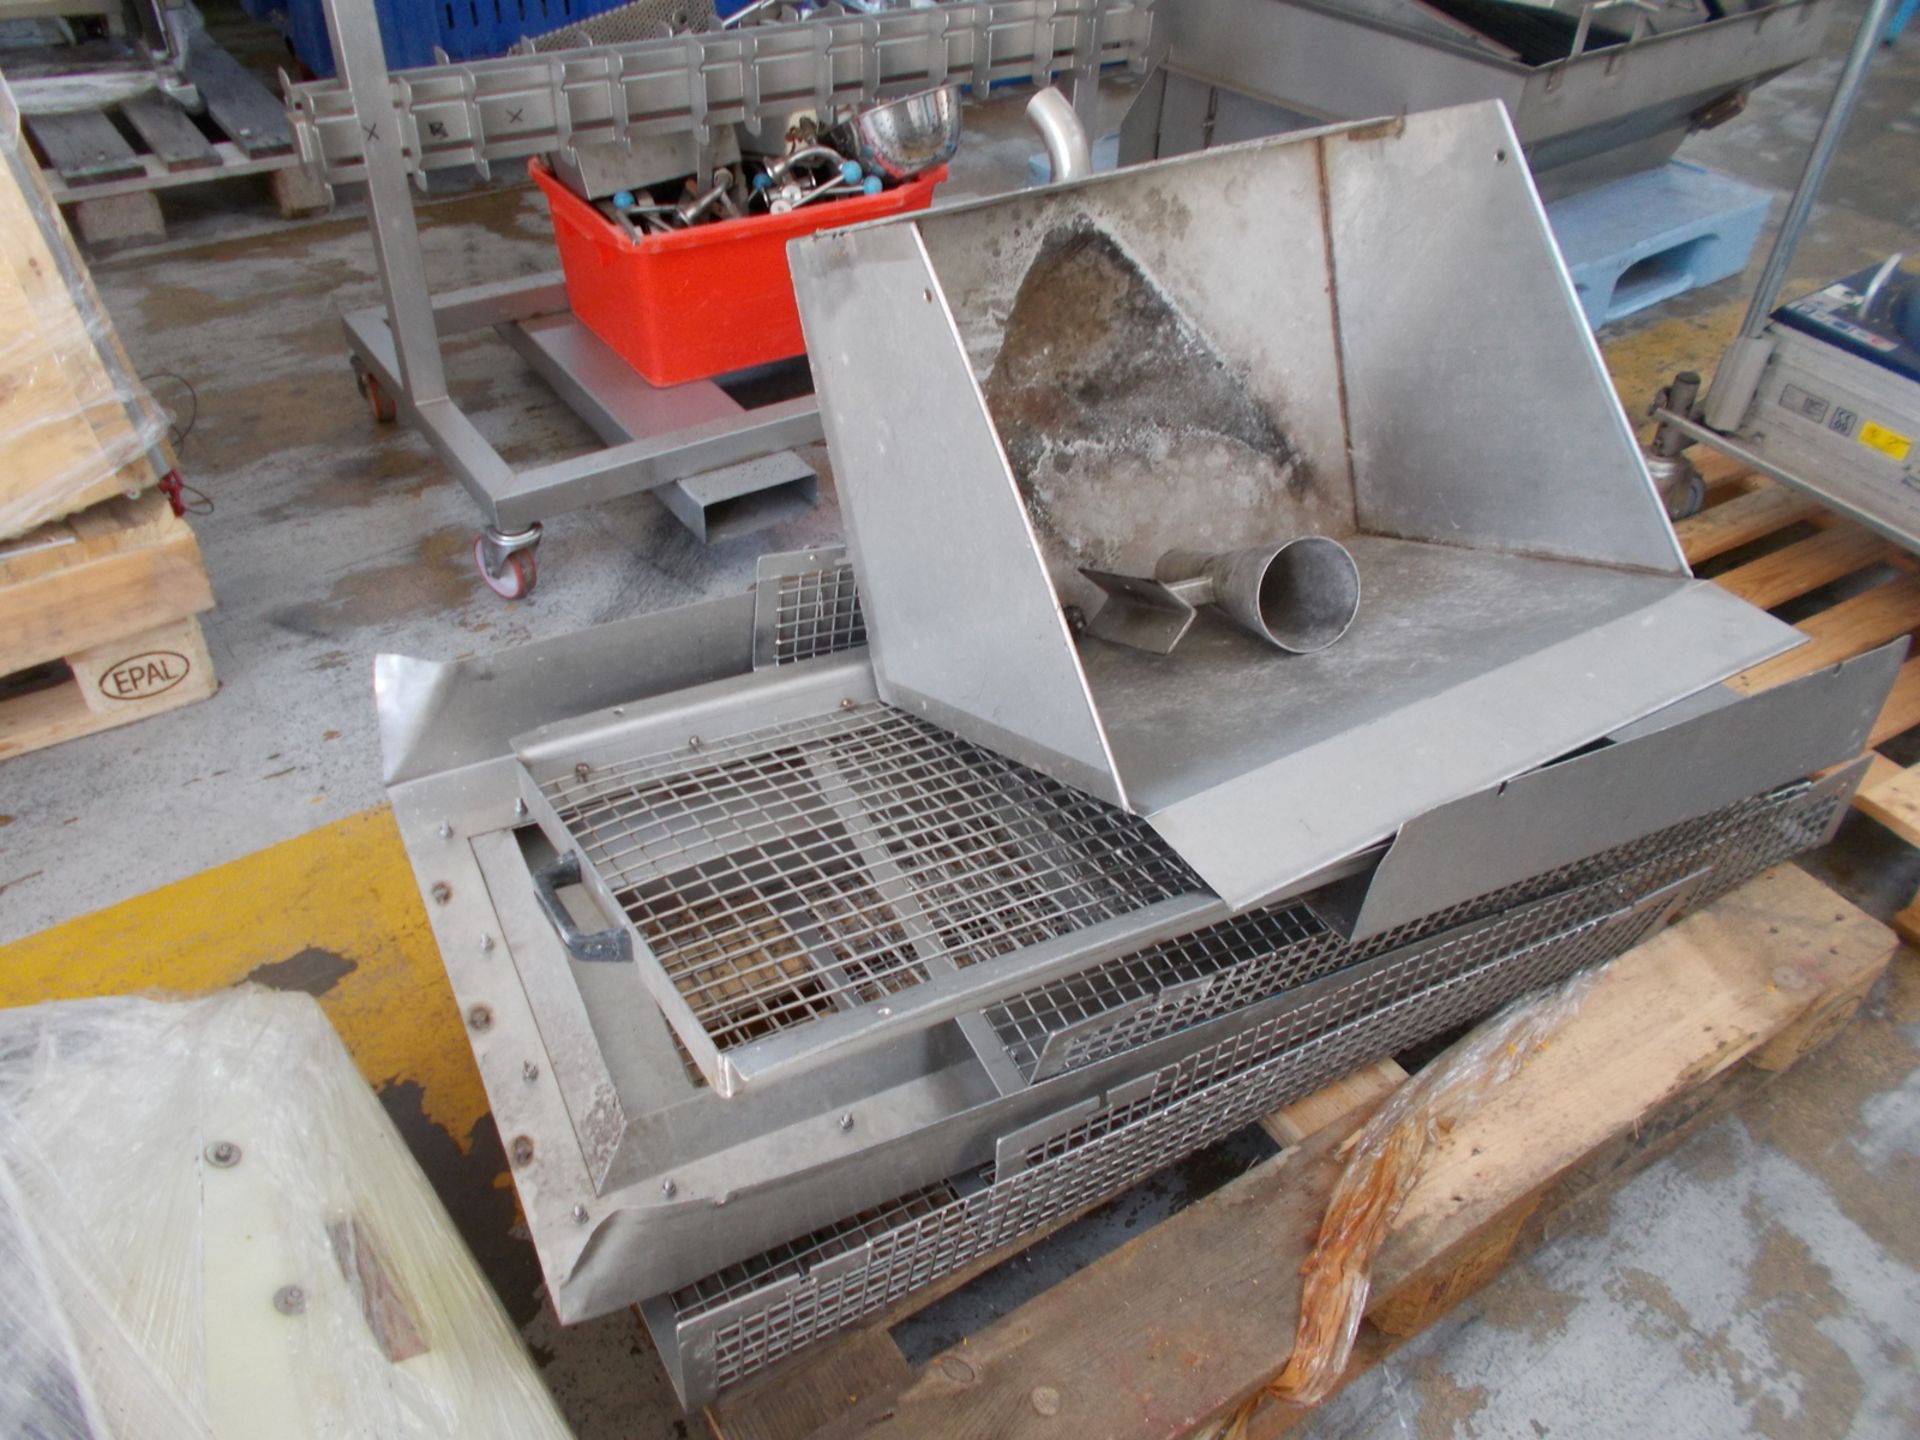 Sieve spares and conveyor guarding - Image 3 of 5